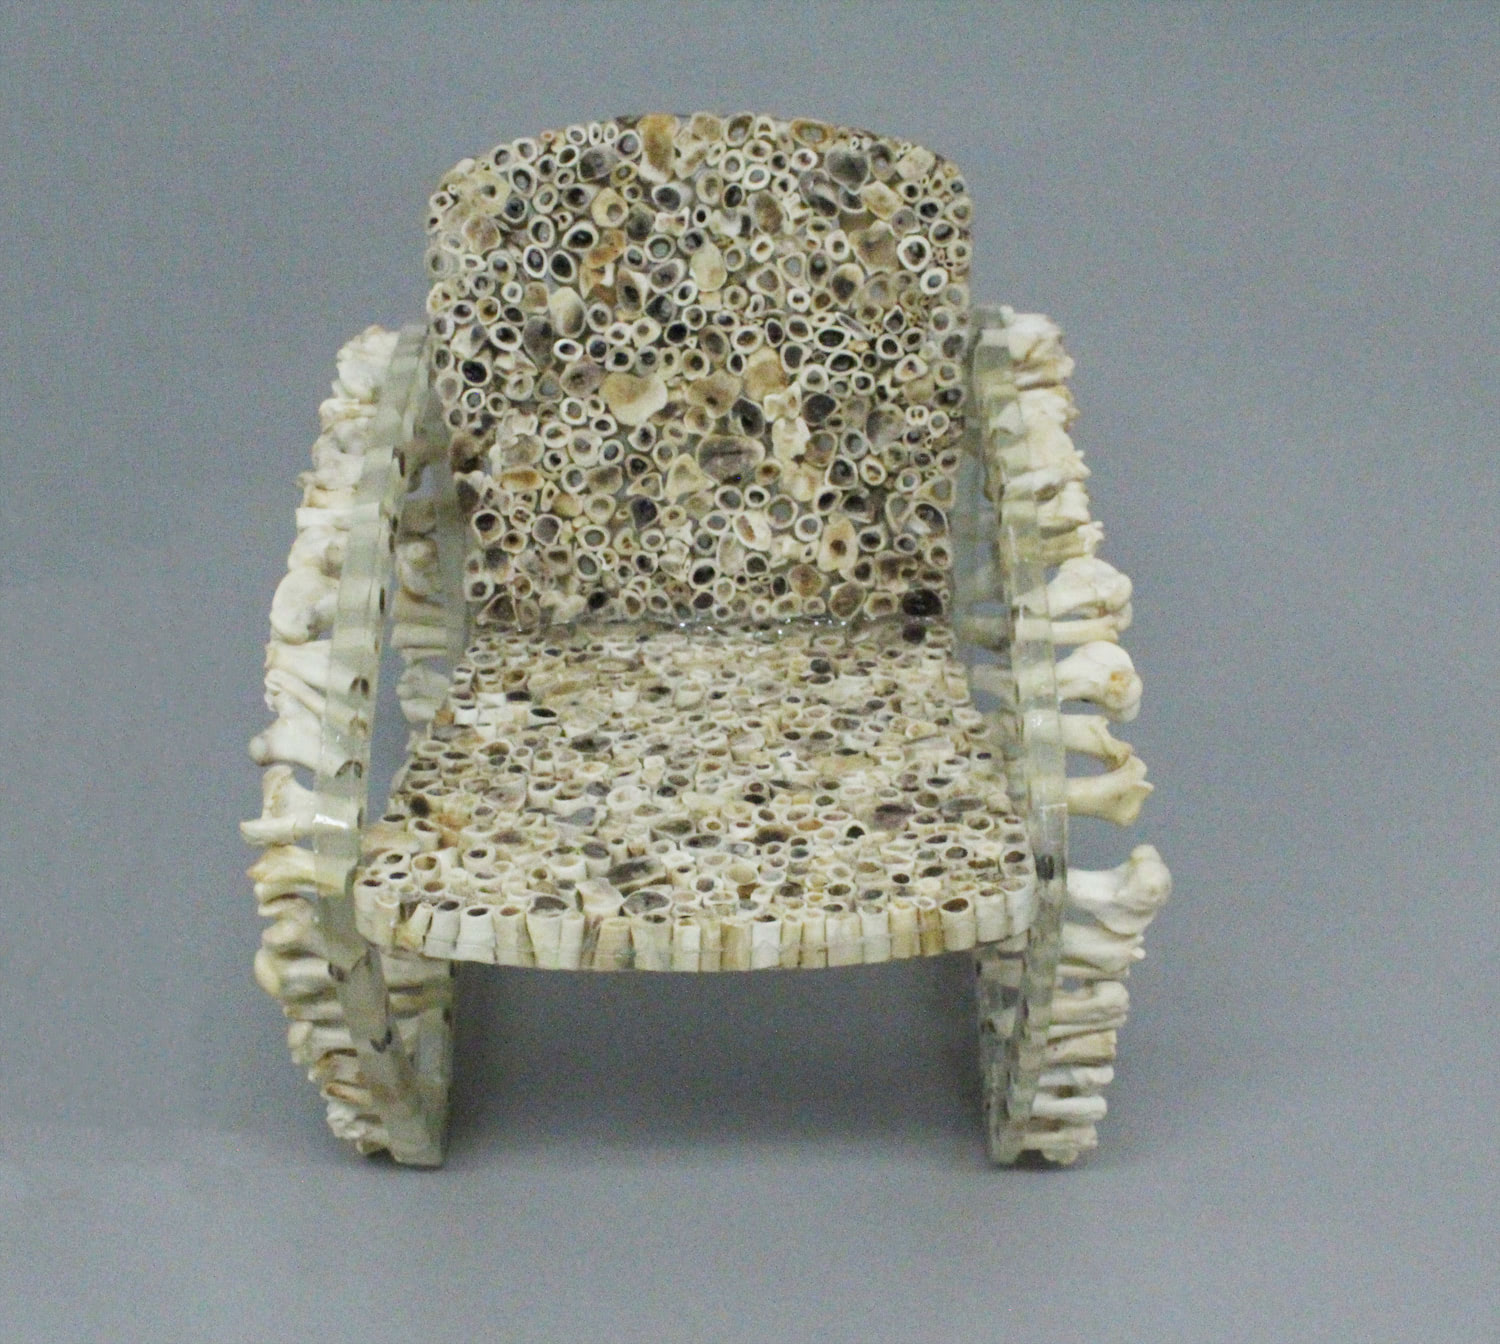 Front view of the Bone Chair.